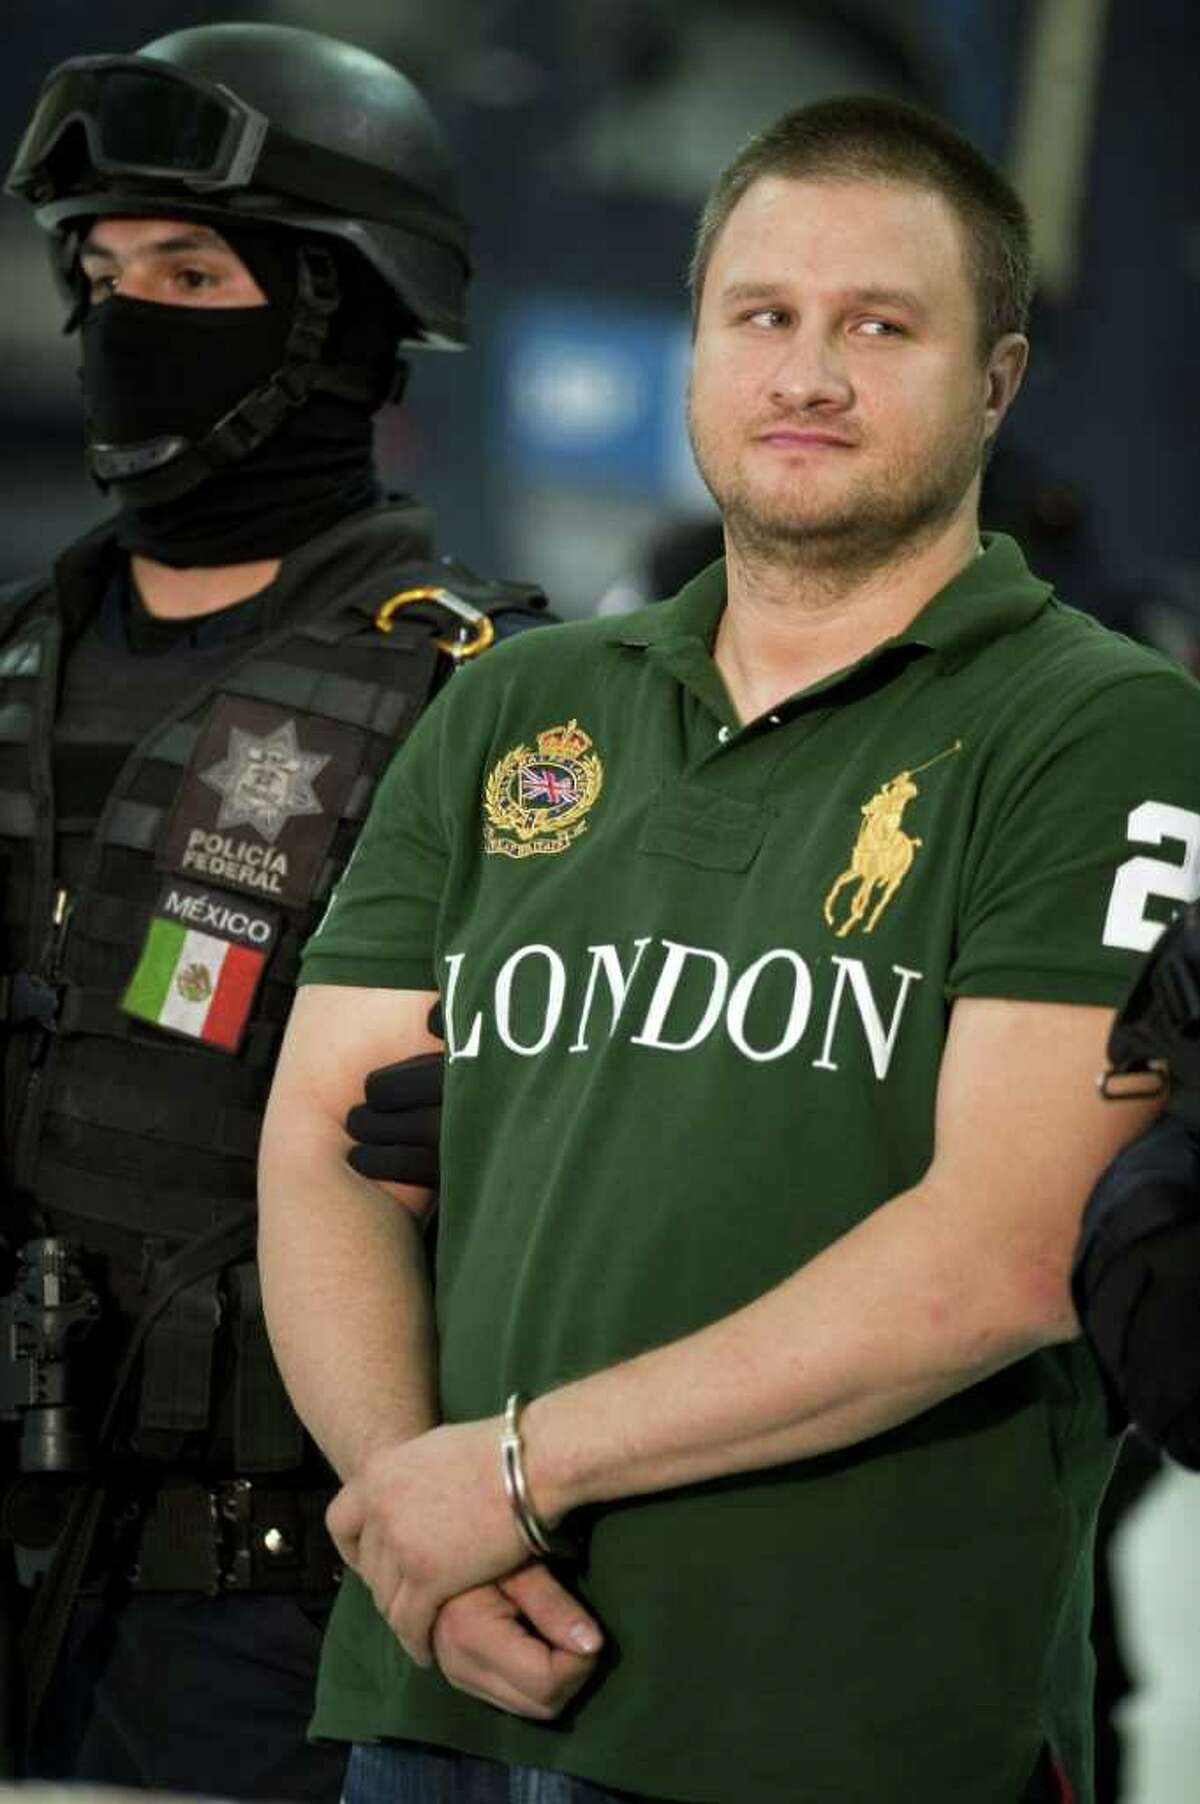 Edgar Valdez Villarreal, known as "La Barbie," for his light hair and eyes, a former Beltrán Leyva hit man and operative. A U.S. citizen born in Laredo, he was arrested in Mexico in August 2010. He’s expected to be returned to the United States in fall 2012, after the Mexican government pursues charges of organized crime, kidnapping and arms possession.